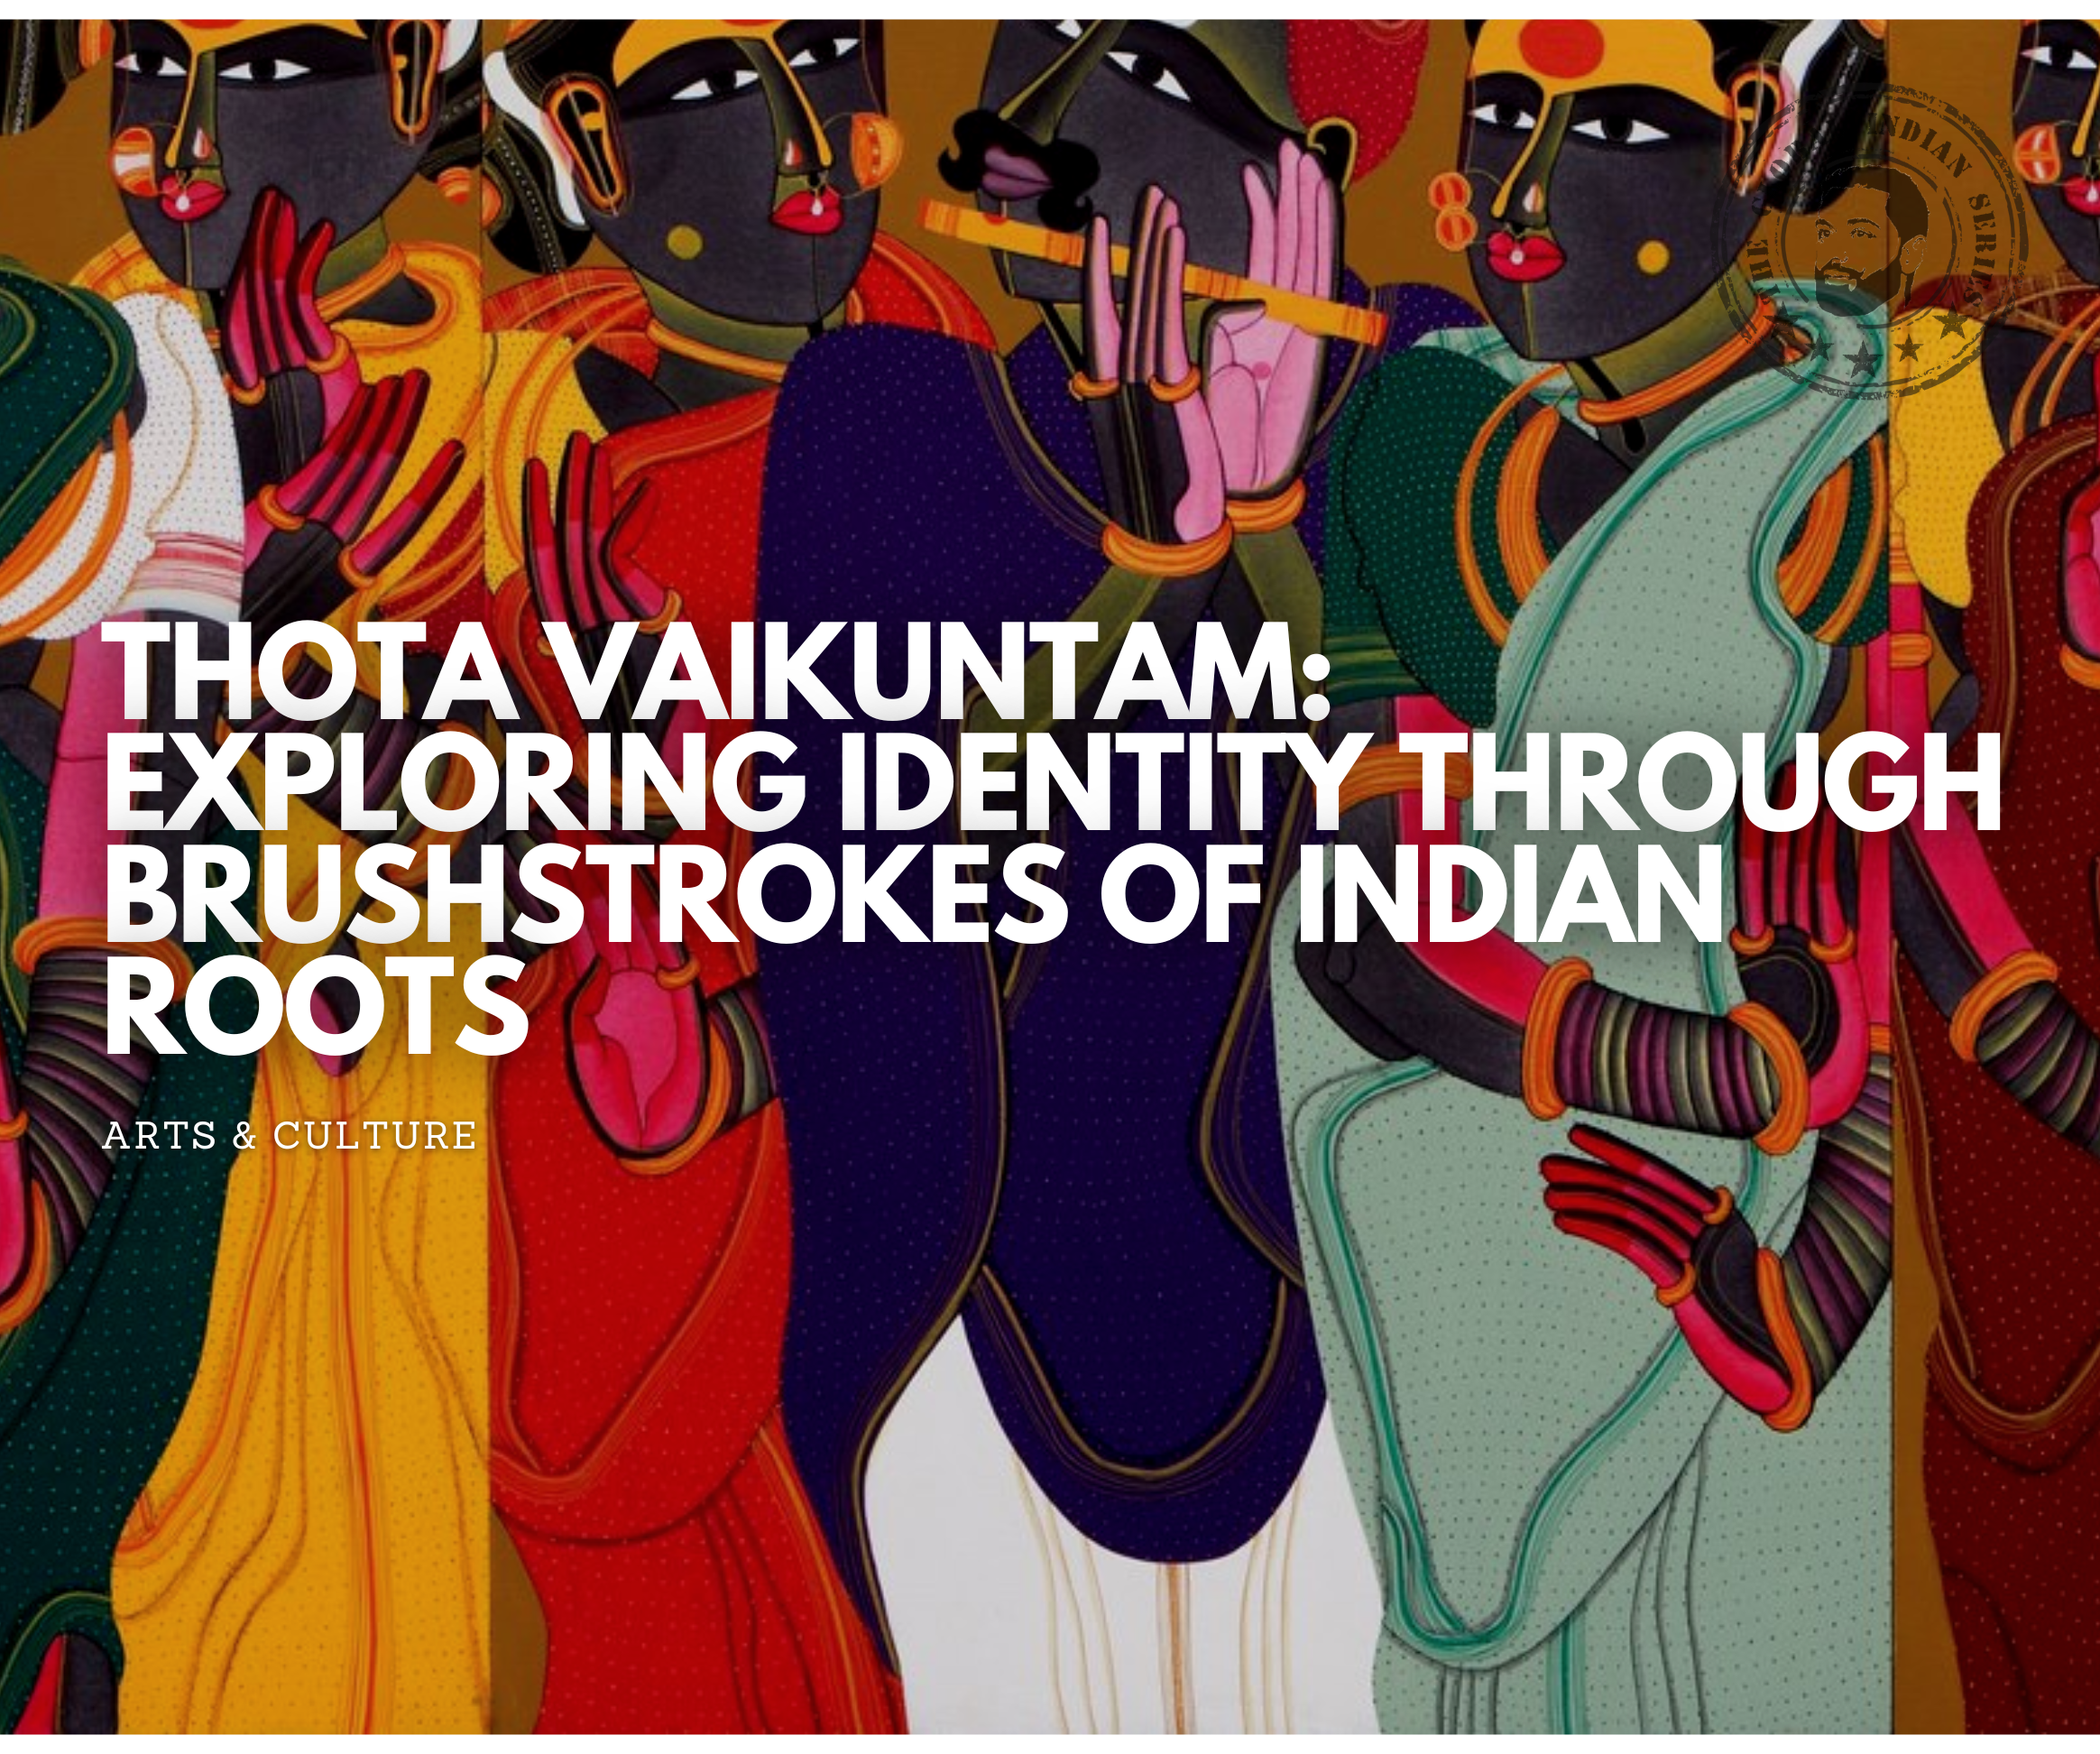 Vaikuntam Ravi is a reputed painter and first received acclaim for his early works that were deeply rooted in folk traditions. Today, his work explores his own journey of finding identity..